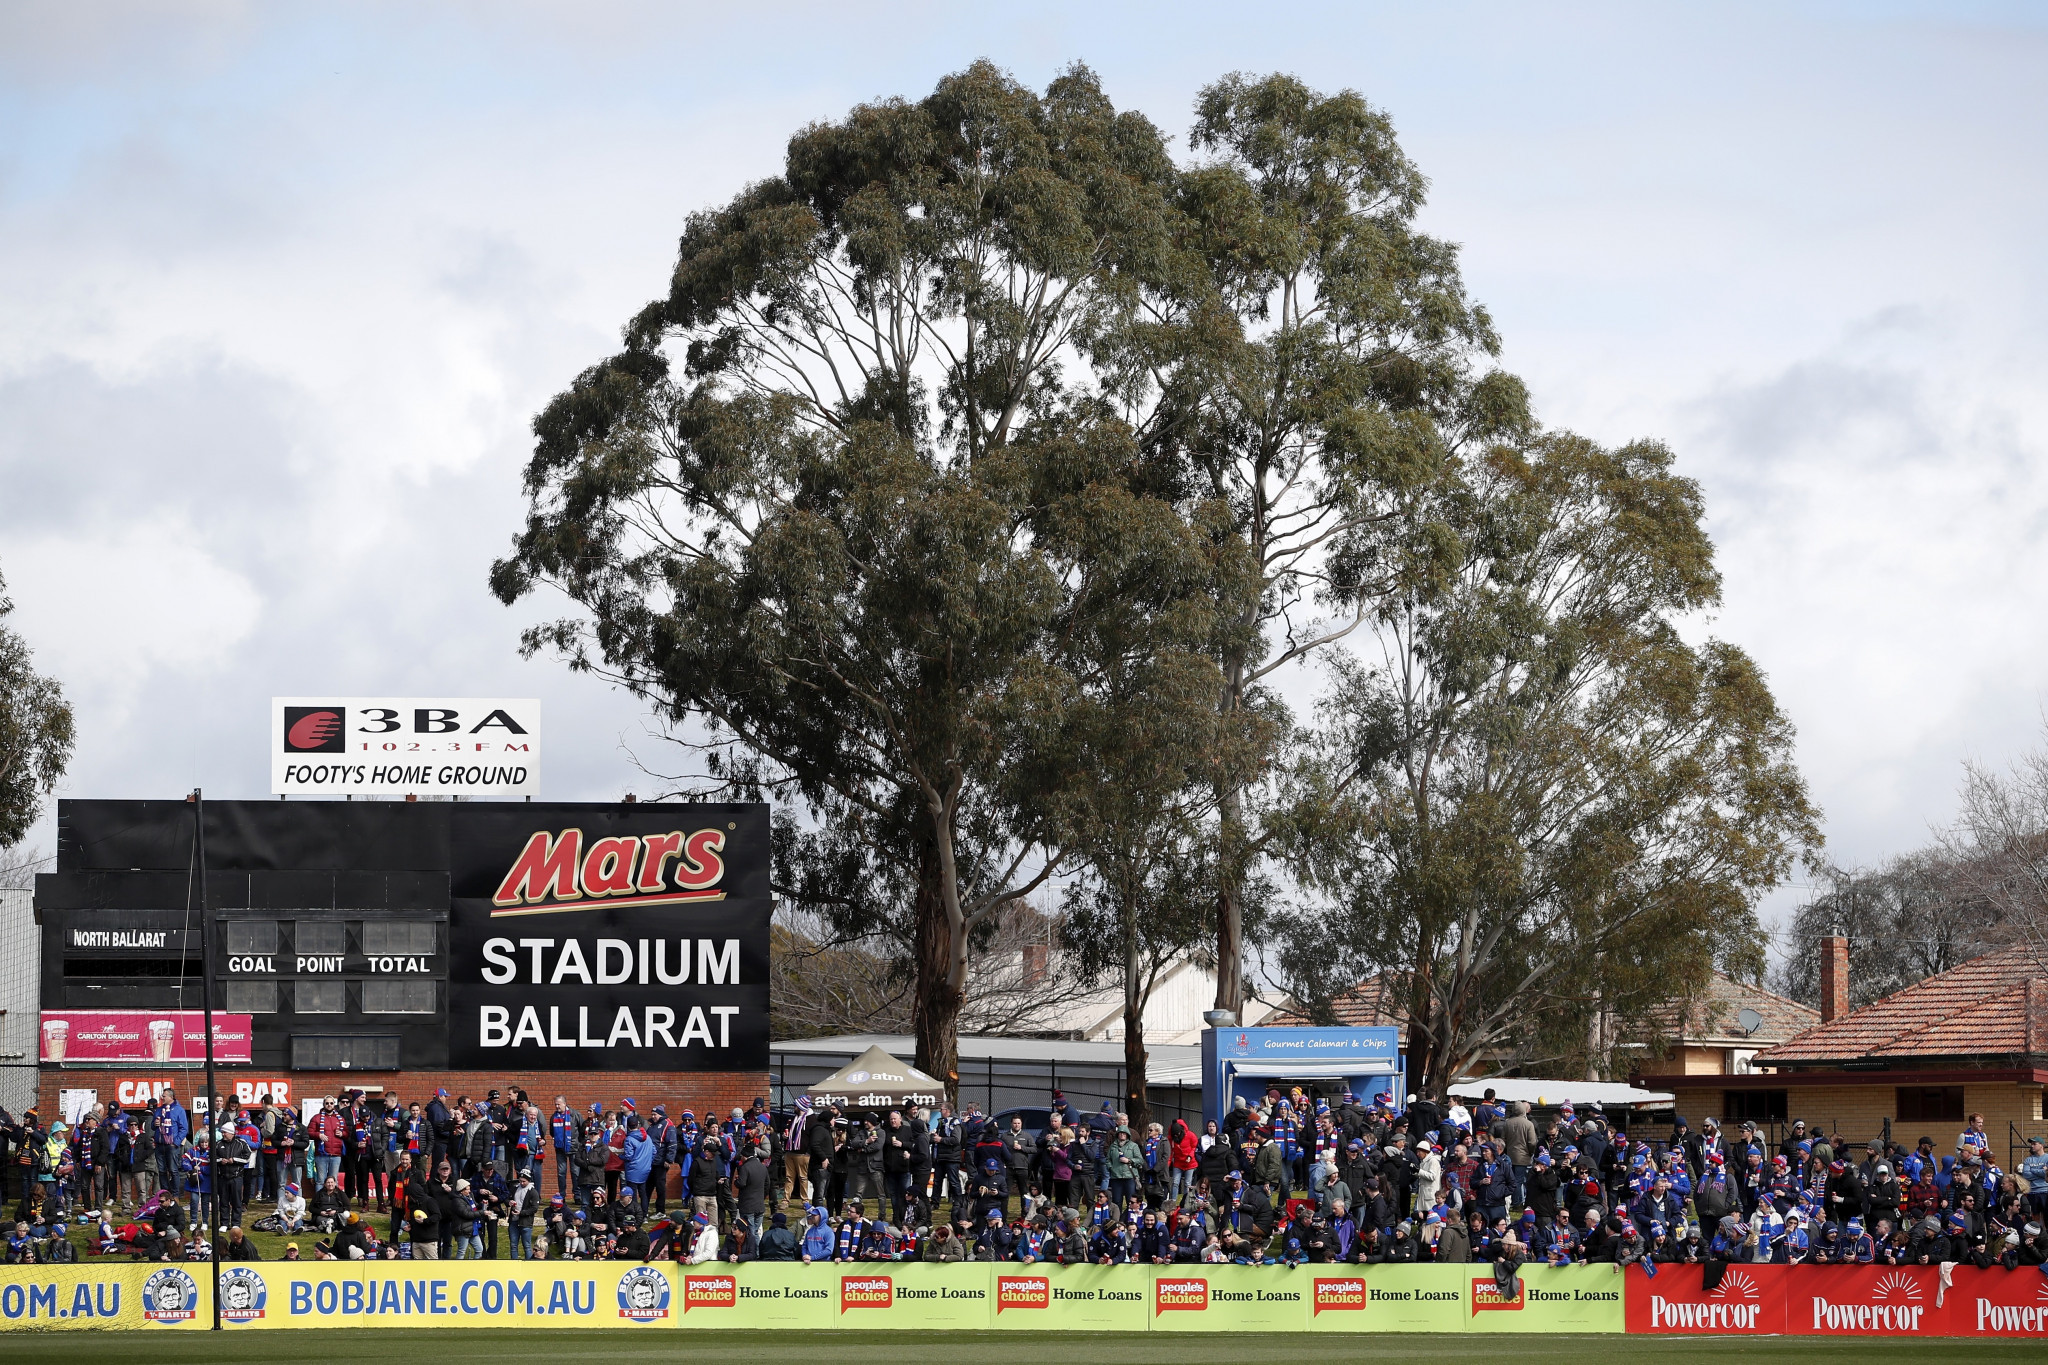 A total of 5,000 permanent seats are set to be installed at the Eureka Stadium in Ballarat ©Getty Images